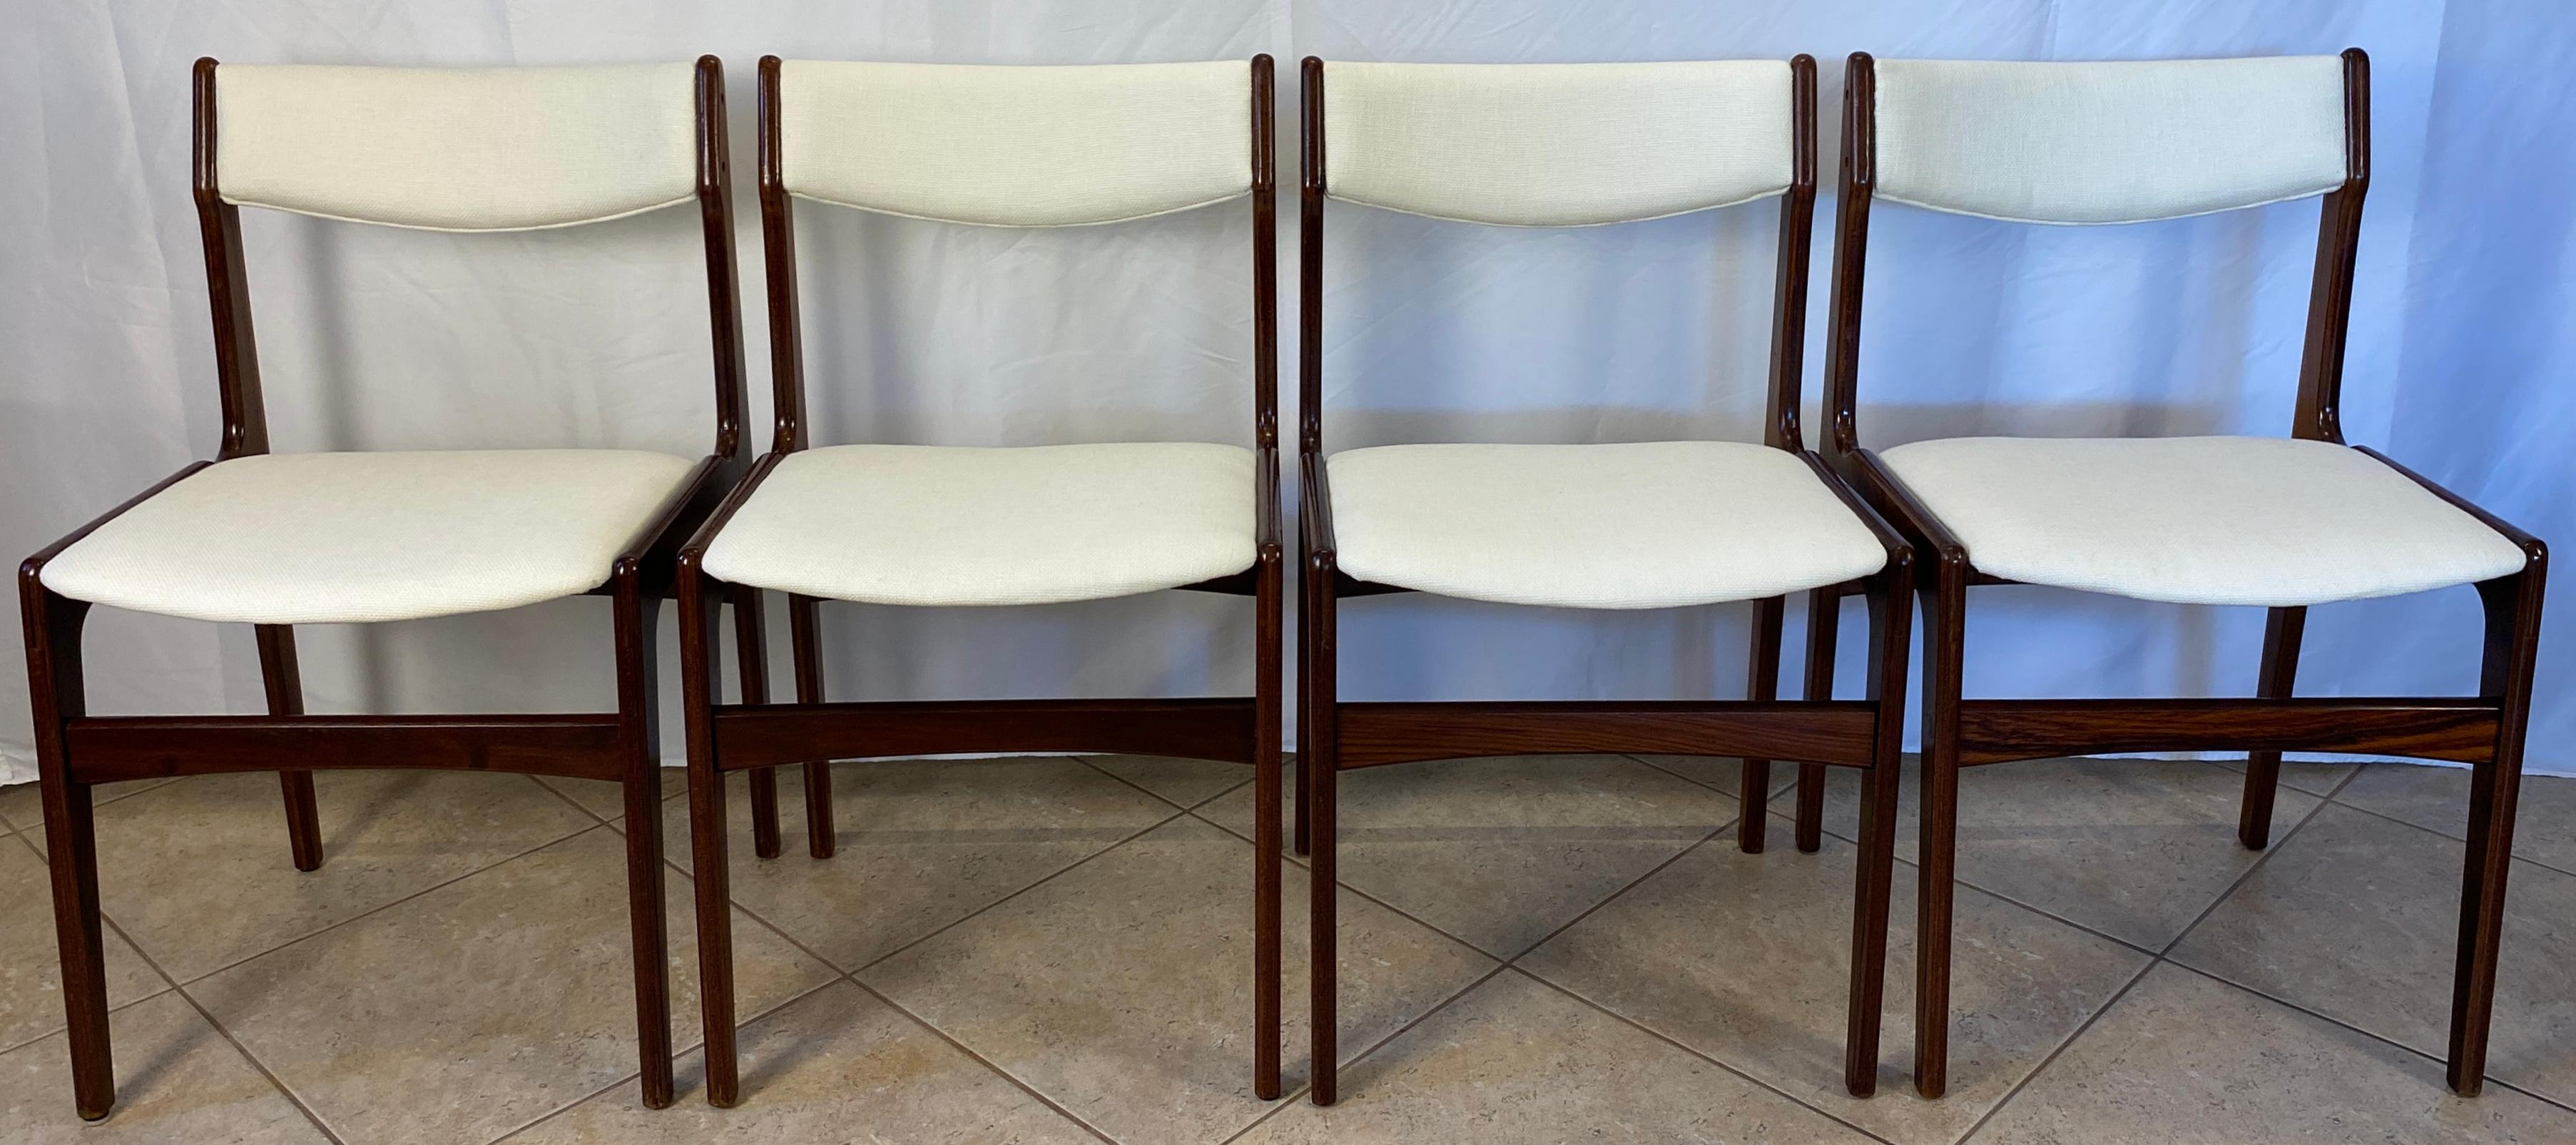 Fabric Set of 4 Mid-Century Modern Danish Dining Room Chairs  For Sale